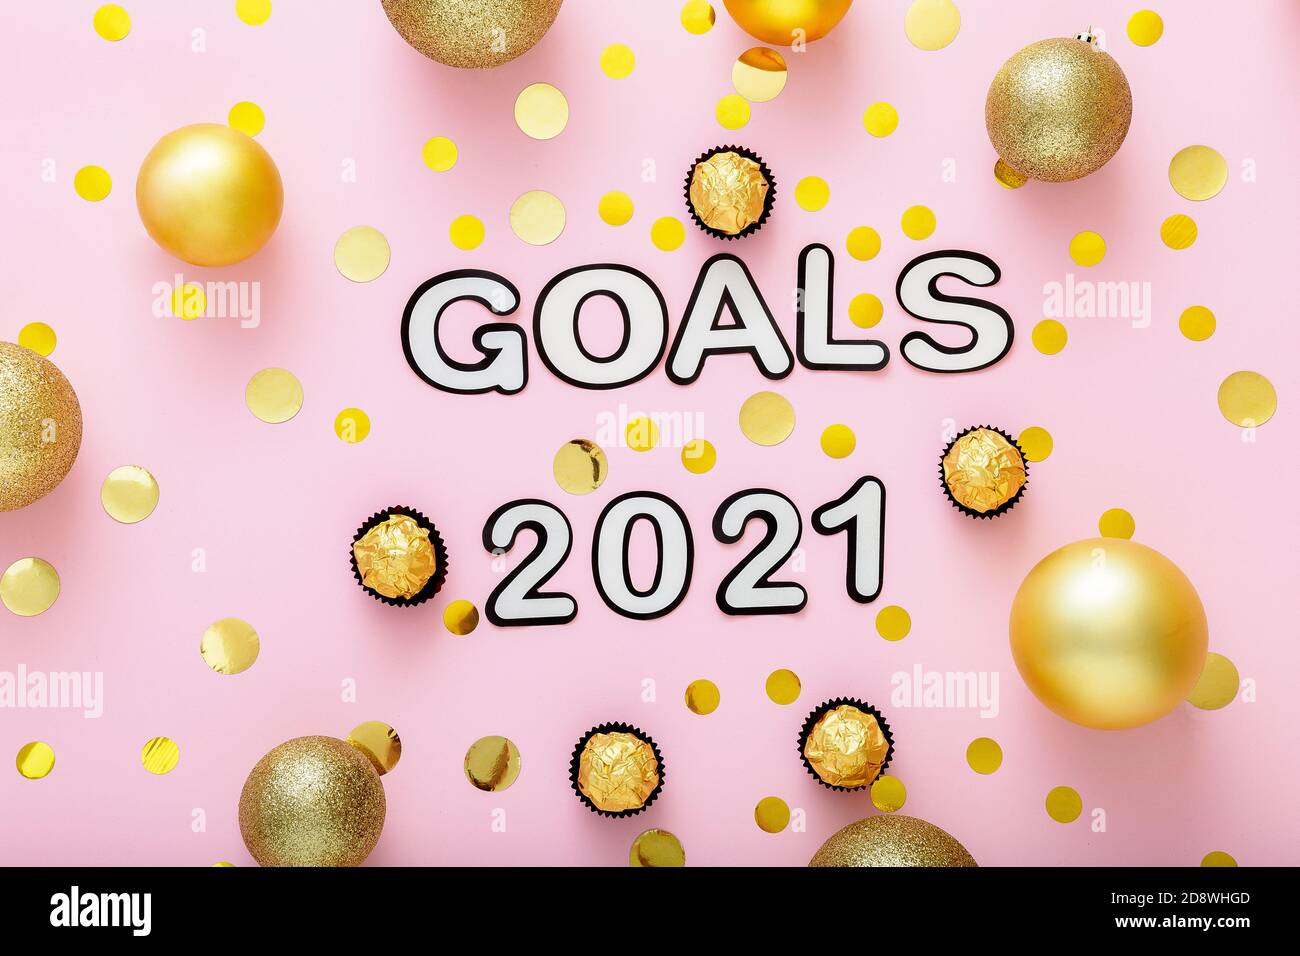 2021 Goals lettering on pink background with fastive christmas decor, golden confetti, balls. New year eve 2021 goals. Stock Photo